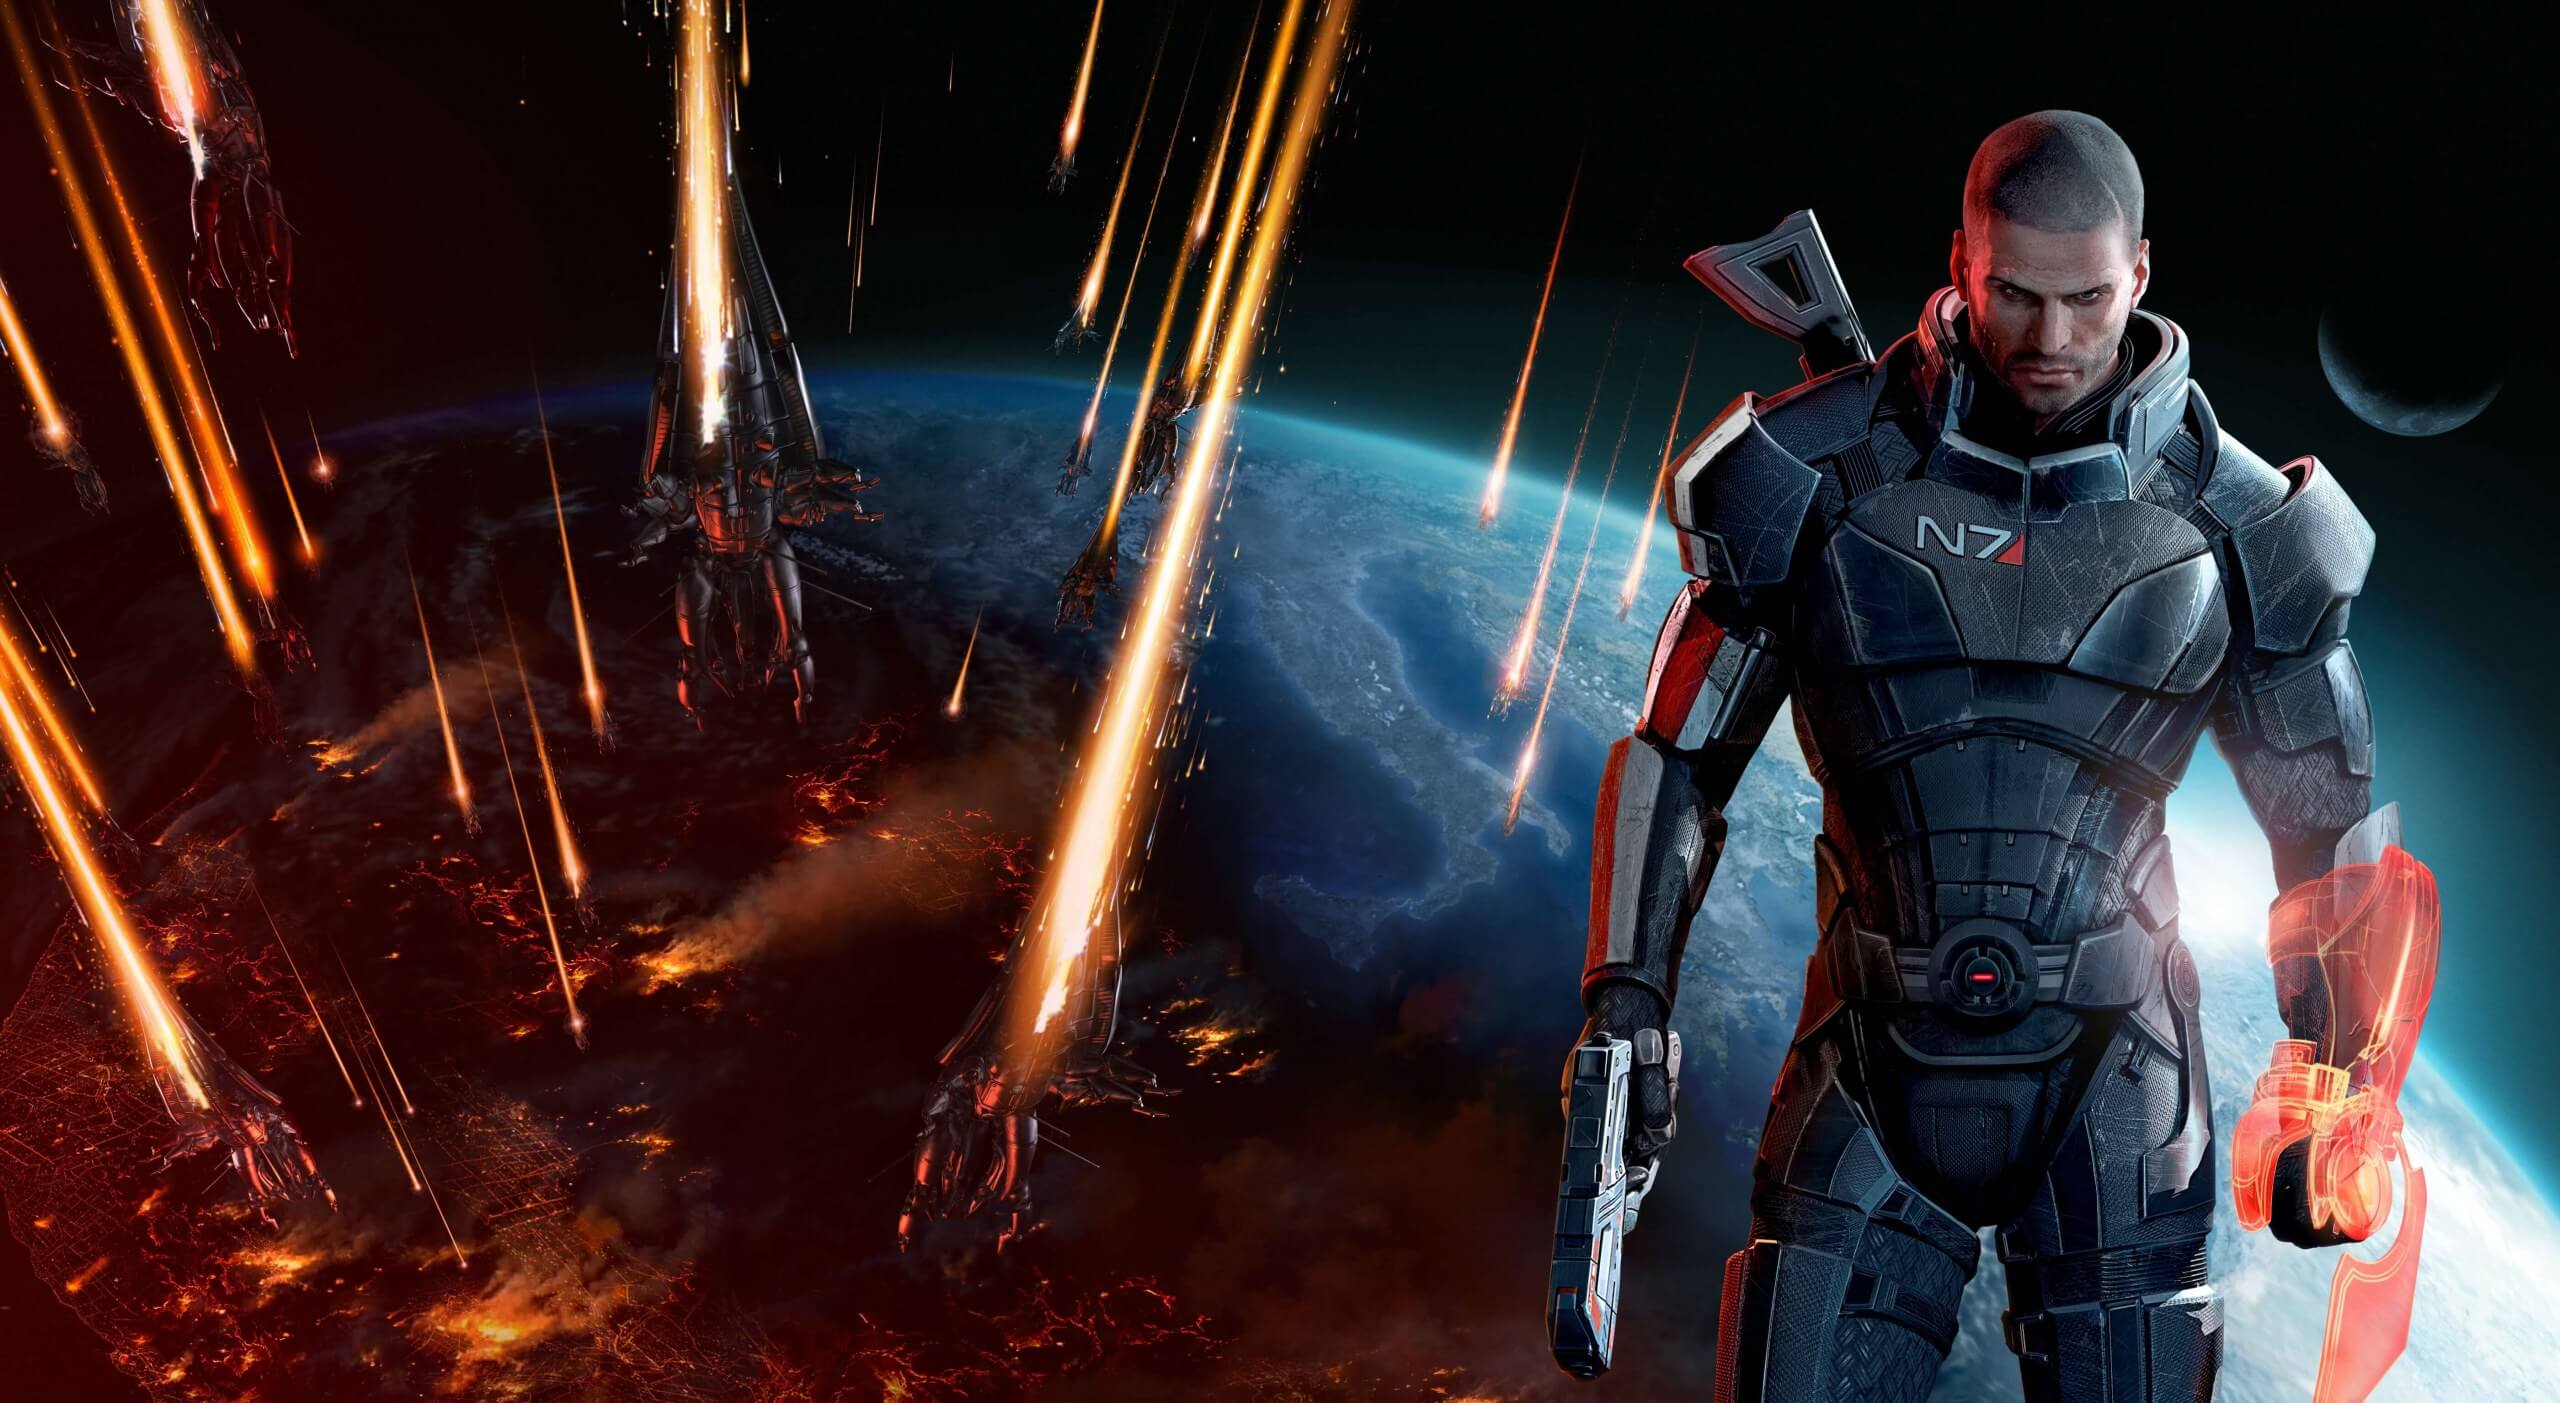 Mass Effect art book listed on Amazon sparks more rumors of a trilogy remake